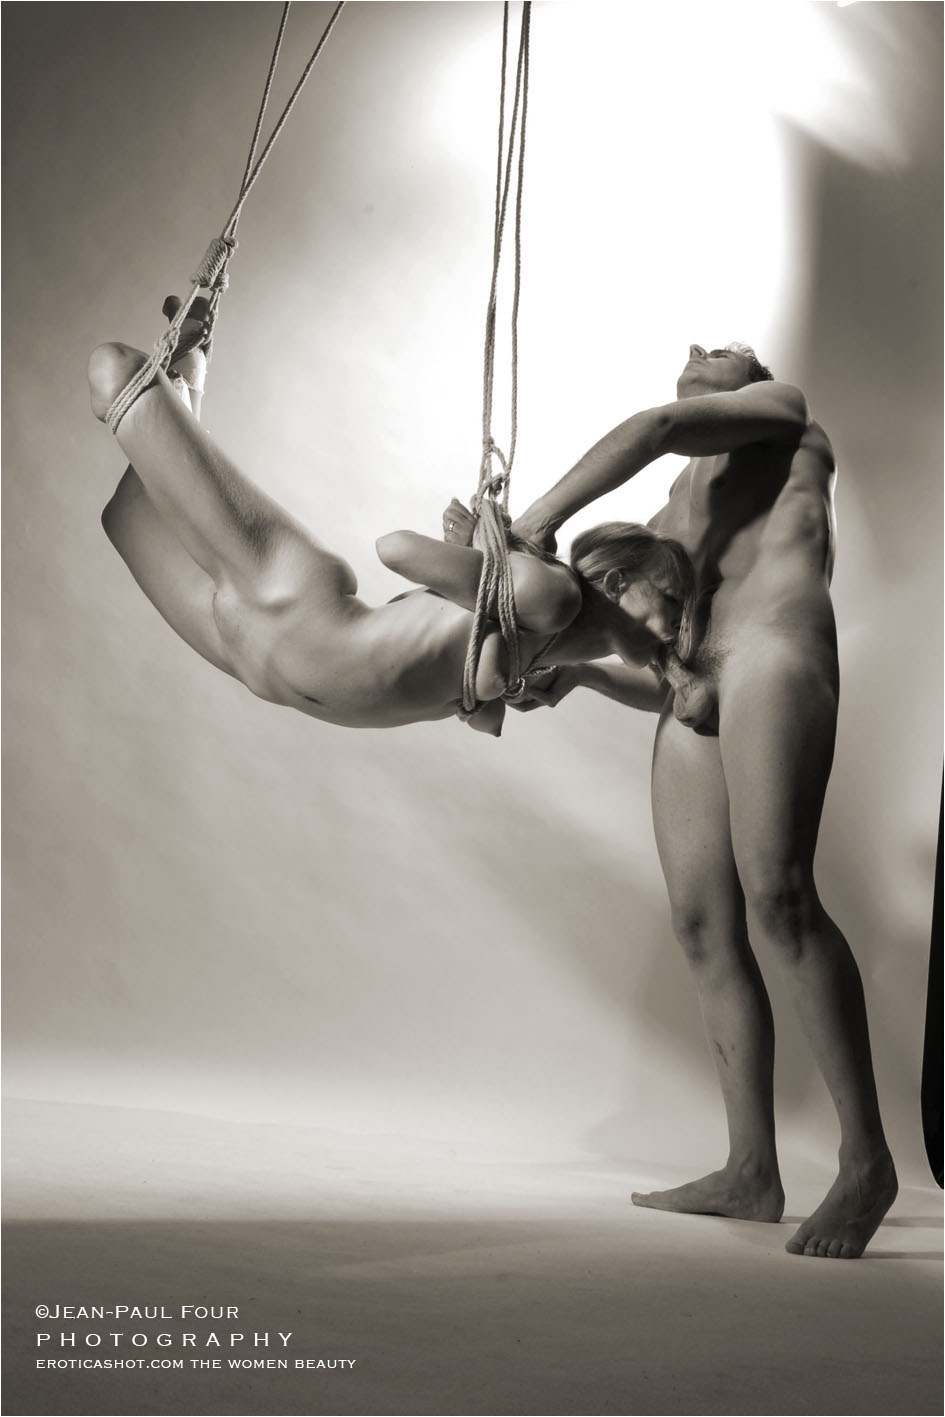 a blonde naked sucks a man naked, Melanie and O, blowjob in the air, gynecological examination, bondage, shibari blowjob, pict by Jean-Paul Four